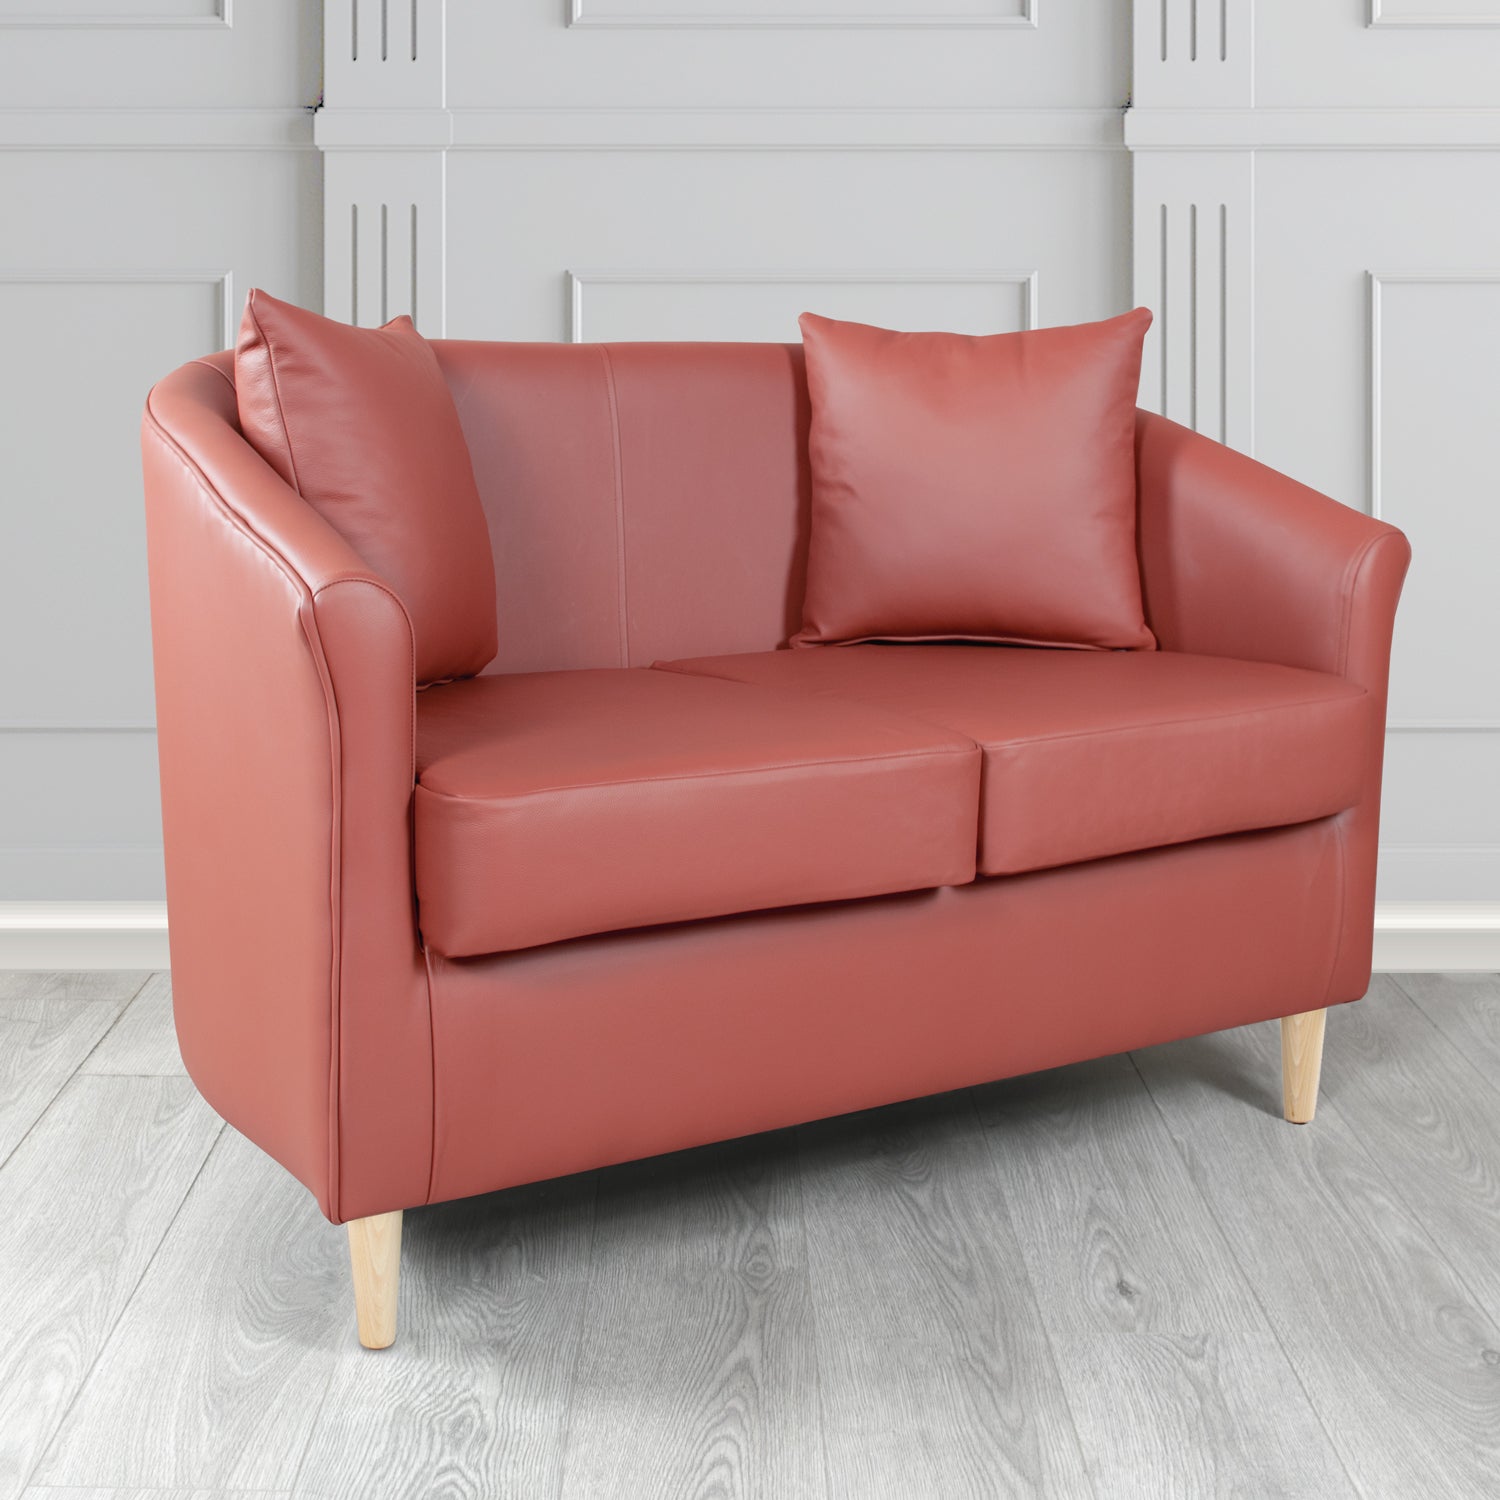 St Tropez Shelly West Crib 5 Genuine Leather 2 Seater Tub Sofa with Scatter Cushions - The Tub Chair Shop